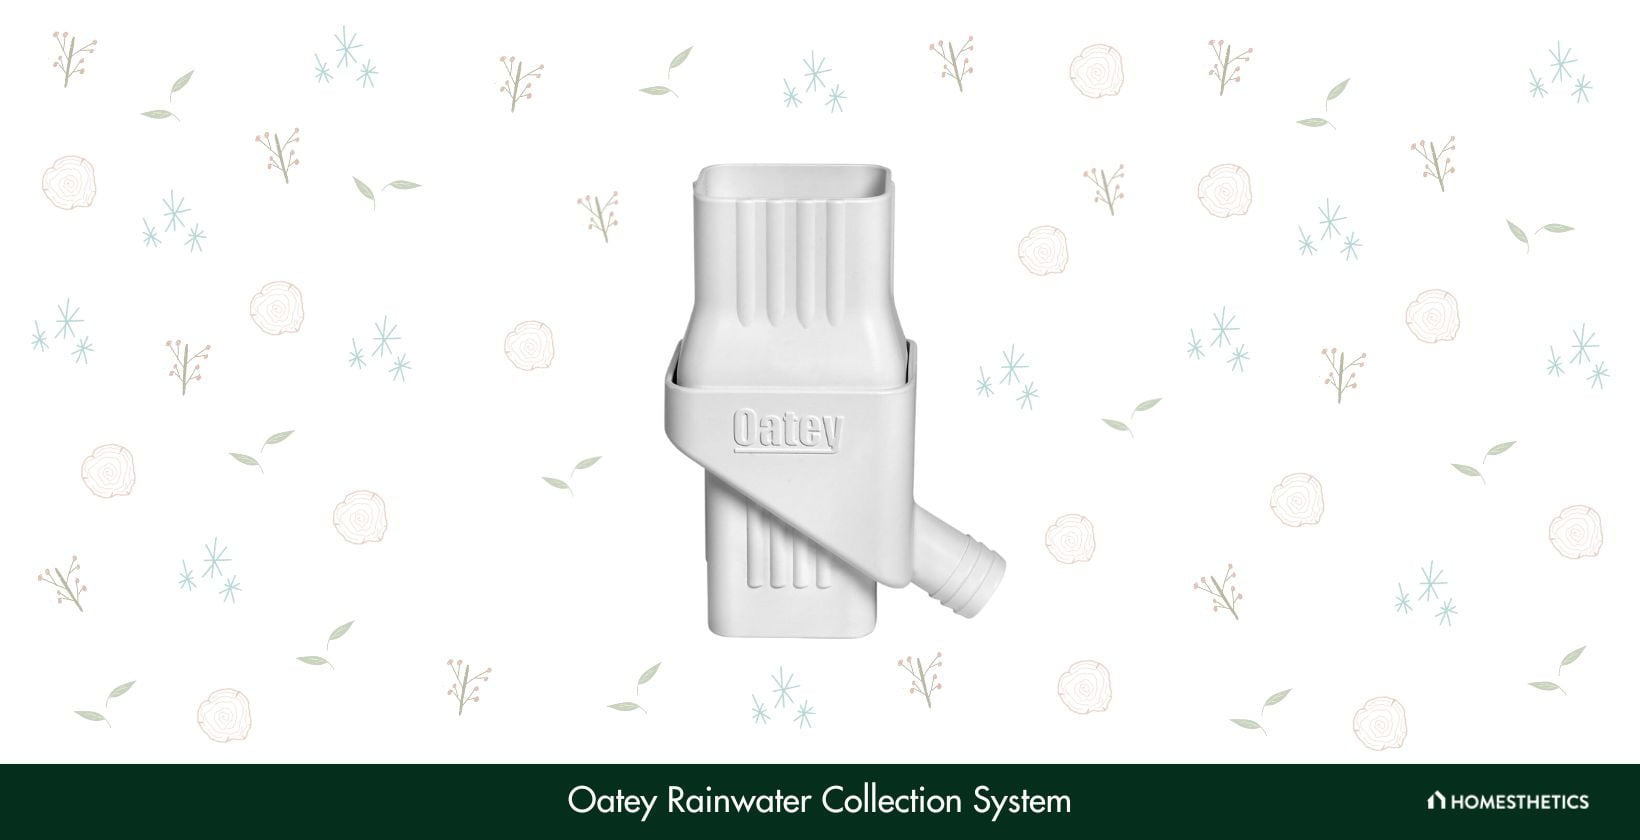 Oatey Rainwater Collection System